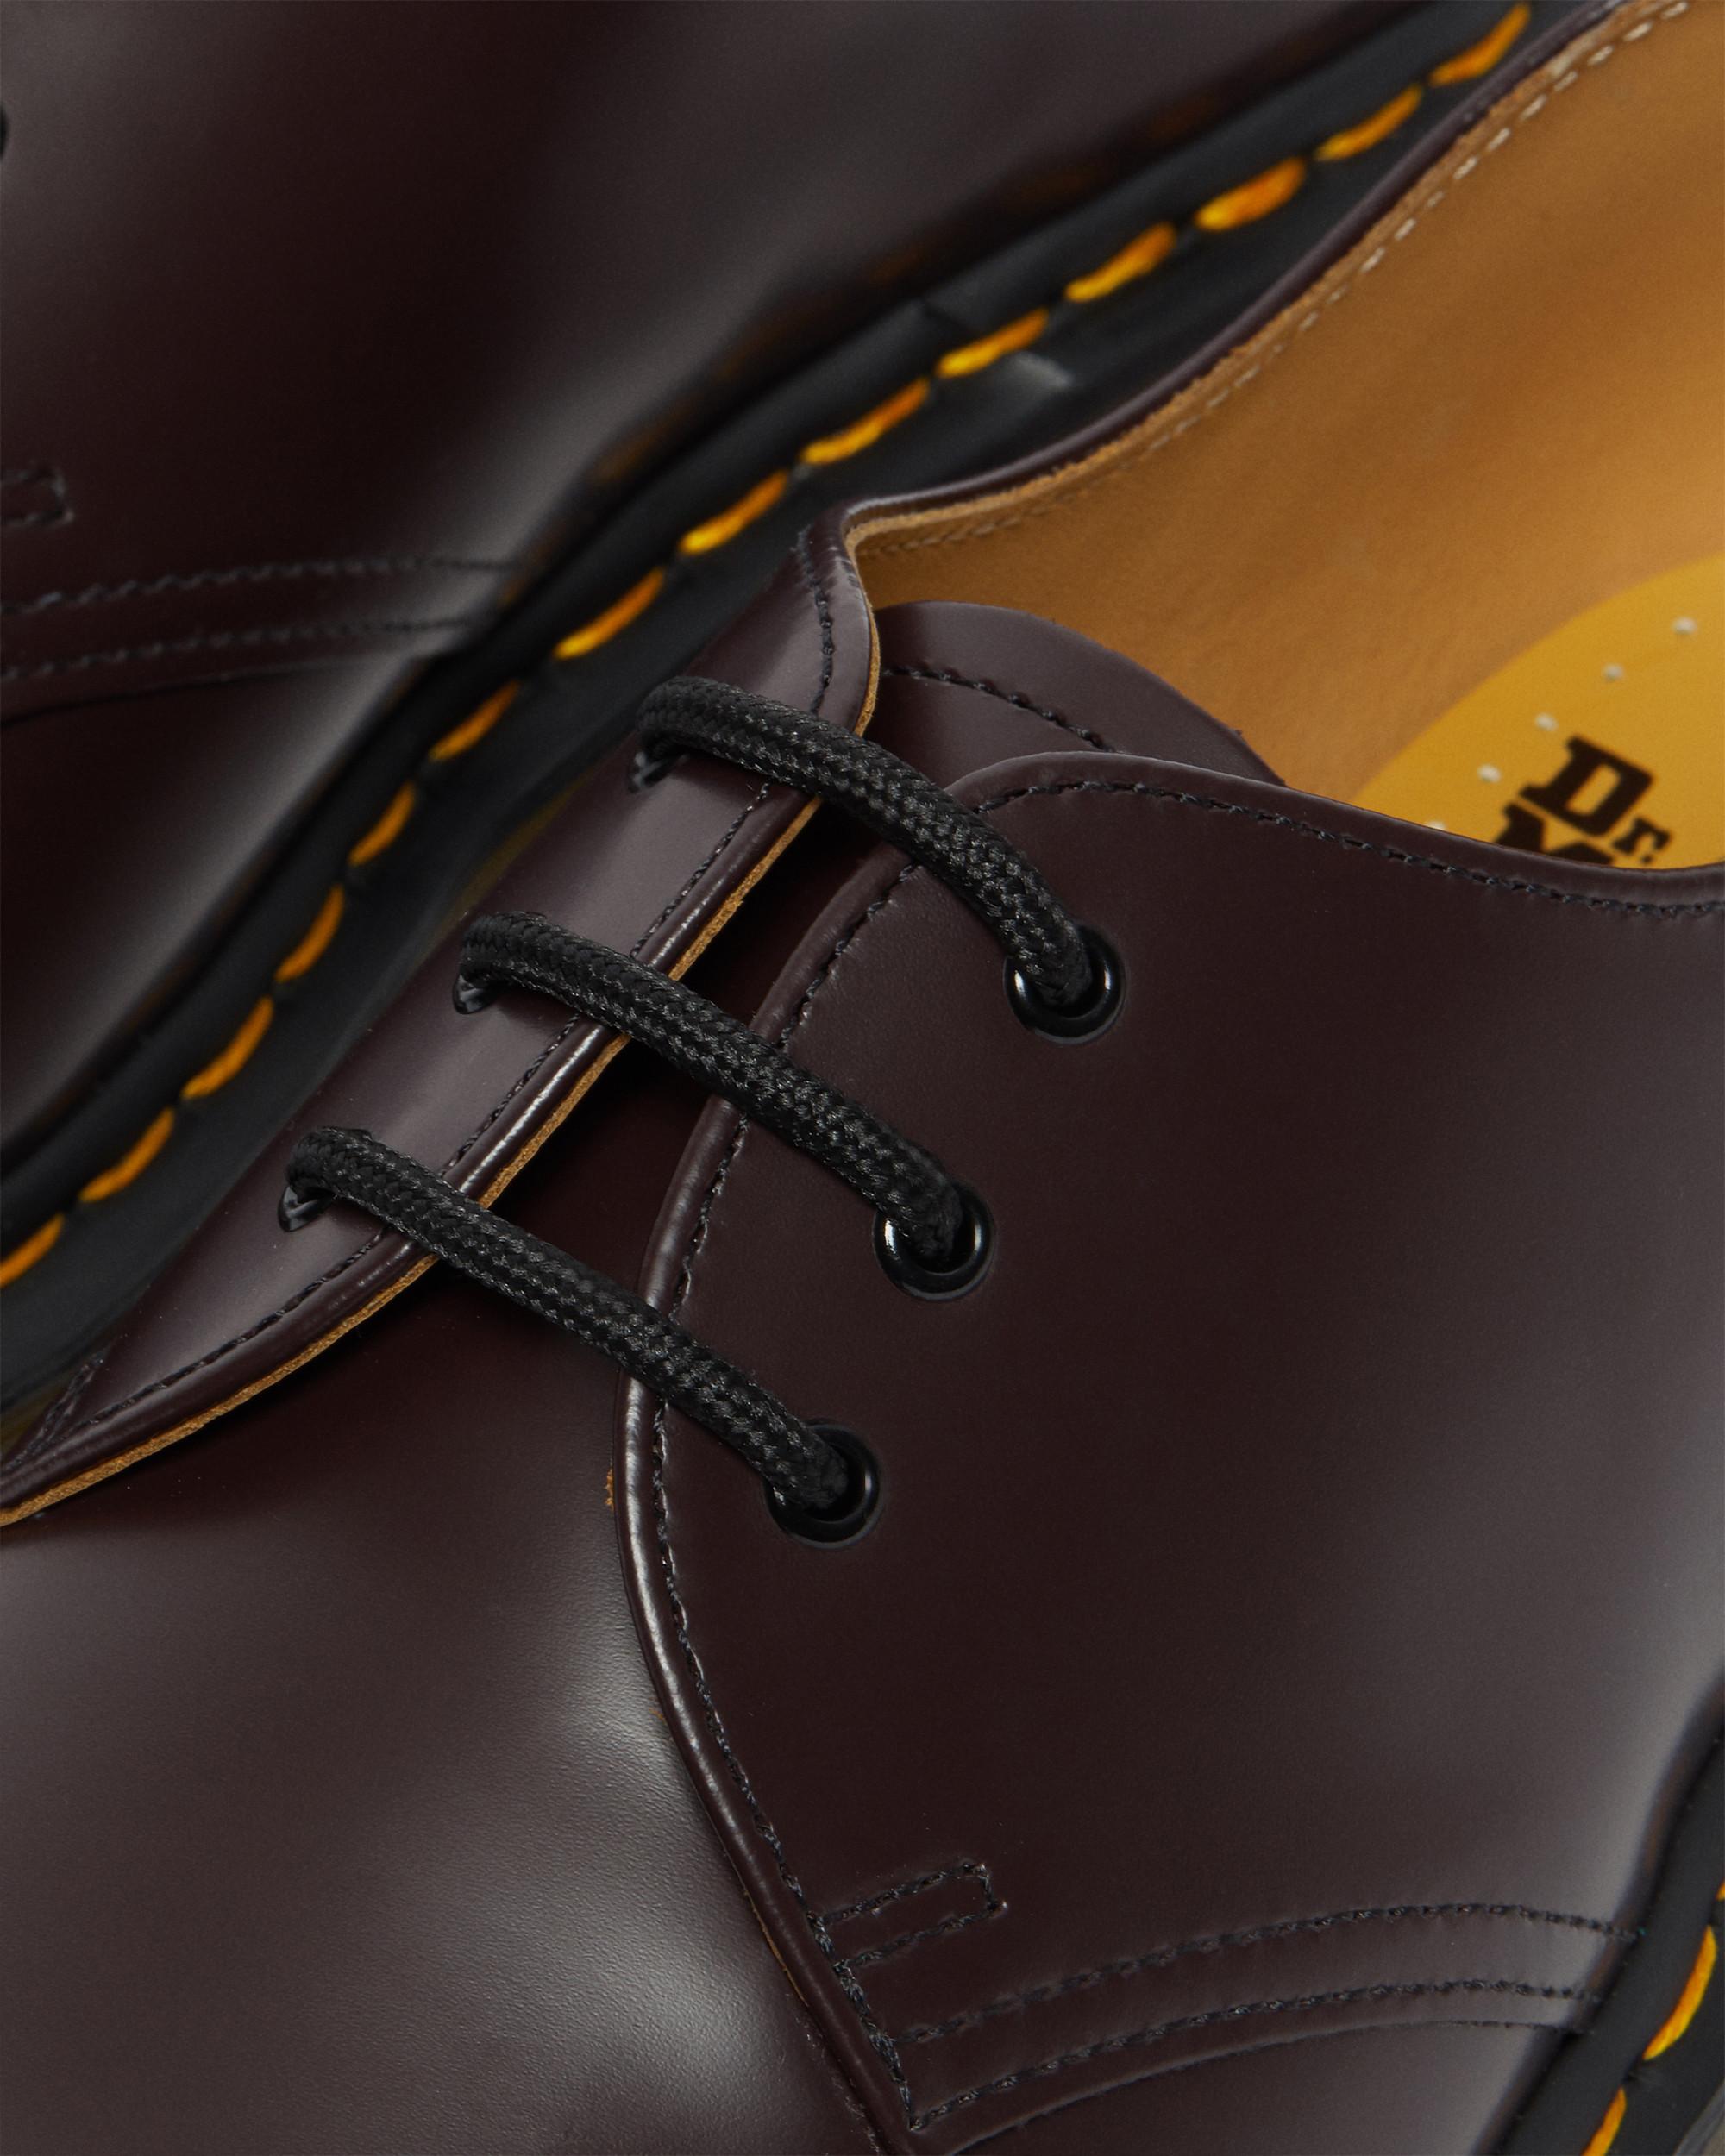 1461 Smooth Leather Oxford Shoes in Burgundy